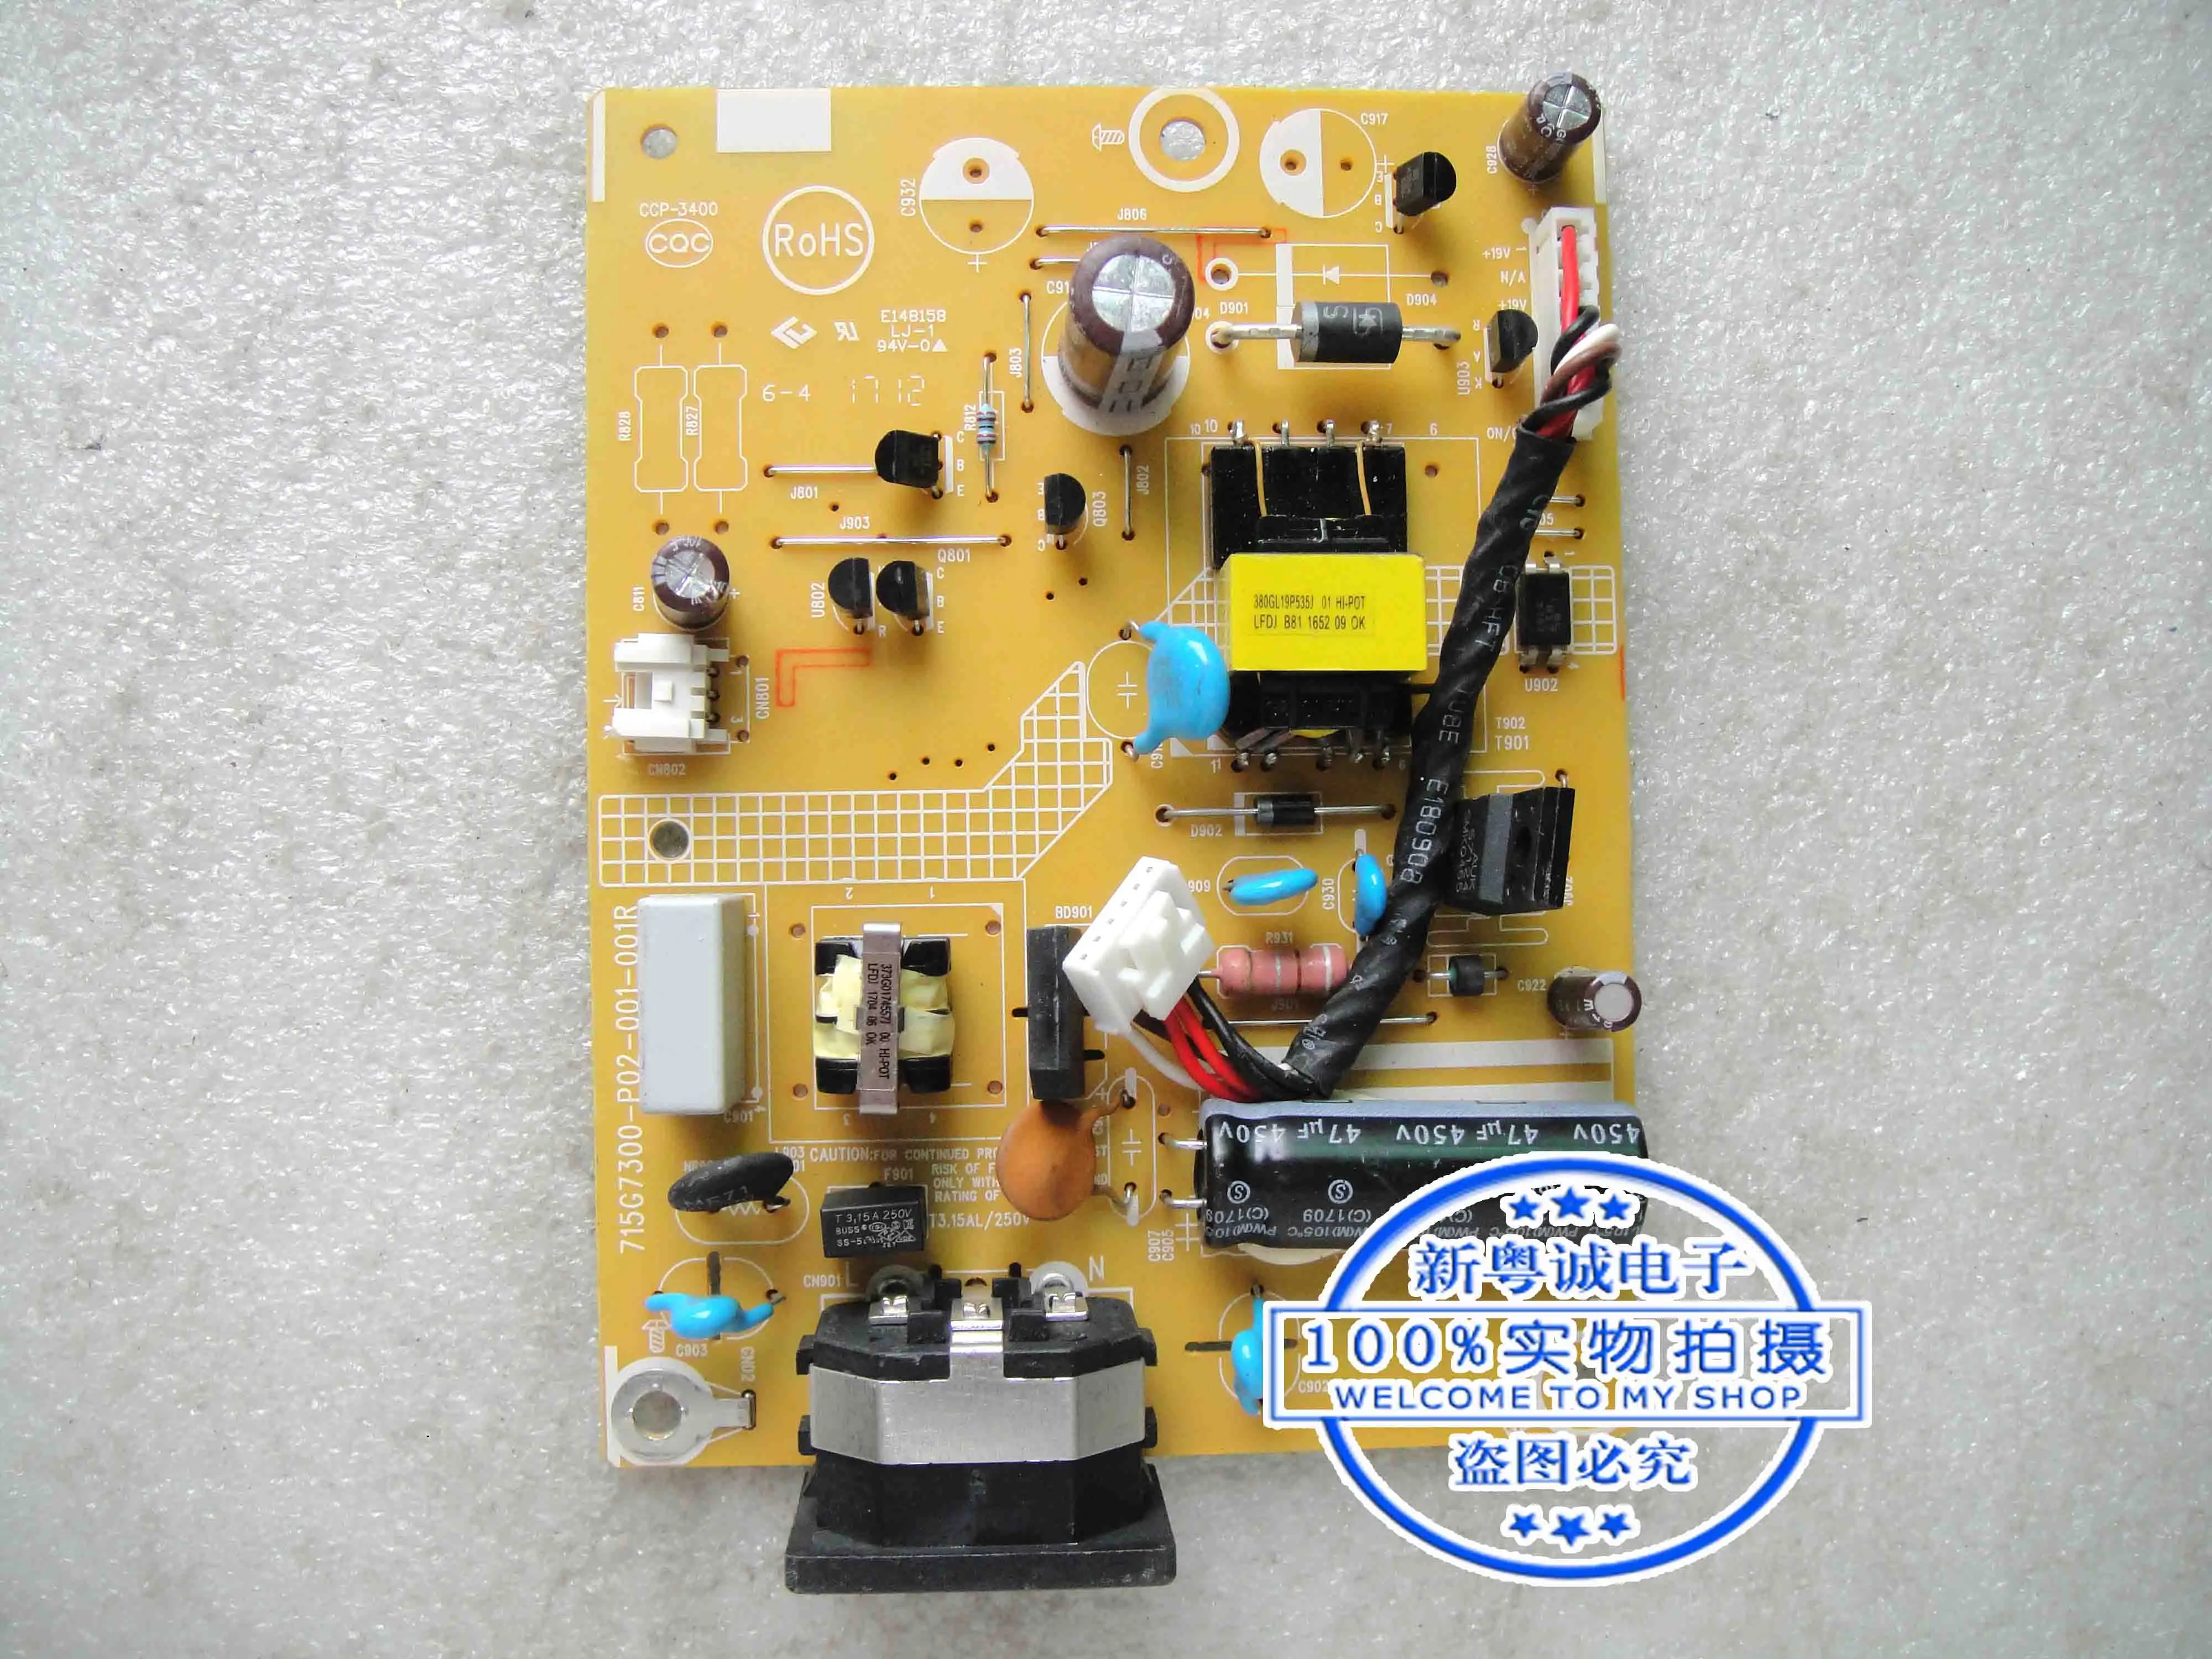 

PHILIPS 193V5 Power Board 715G7300-P02-001-001R High Voltage Panel 185